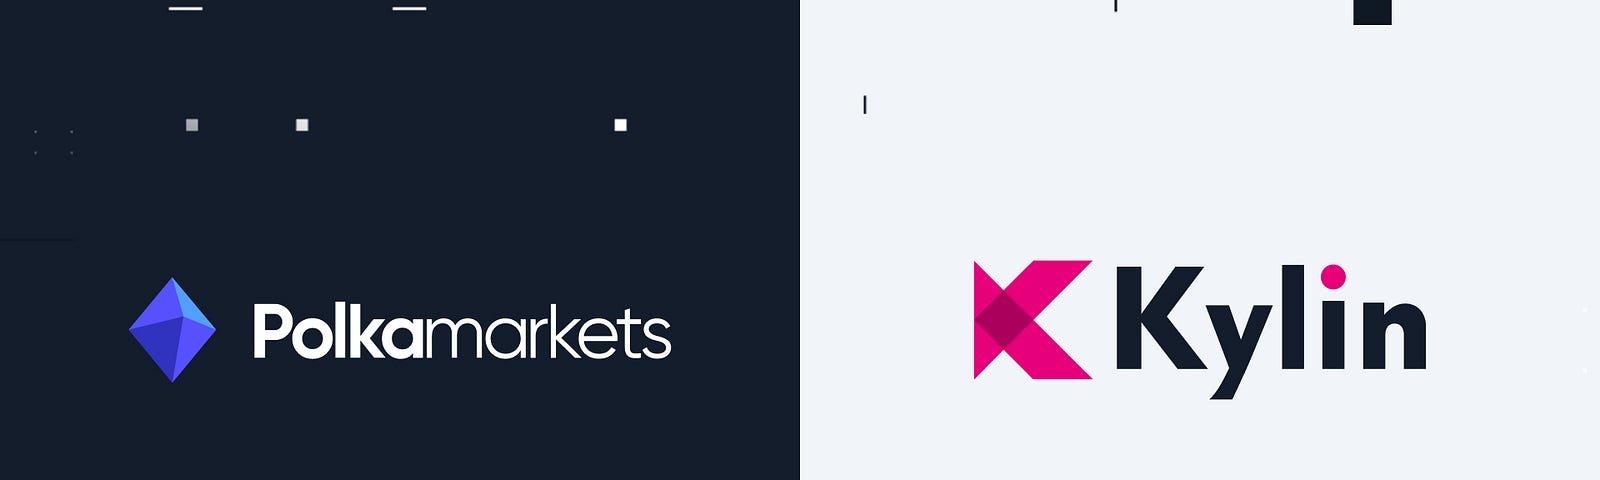 Polkamarkets Partners with Kylin Network